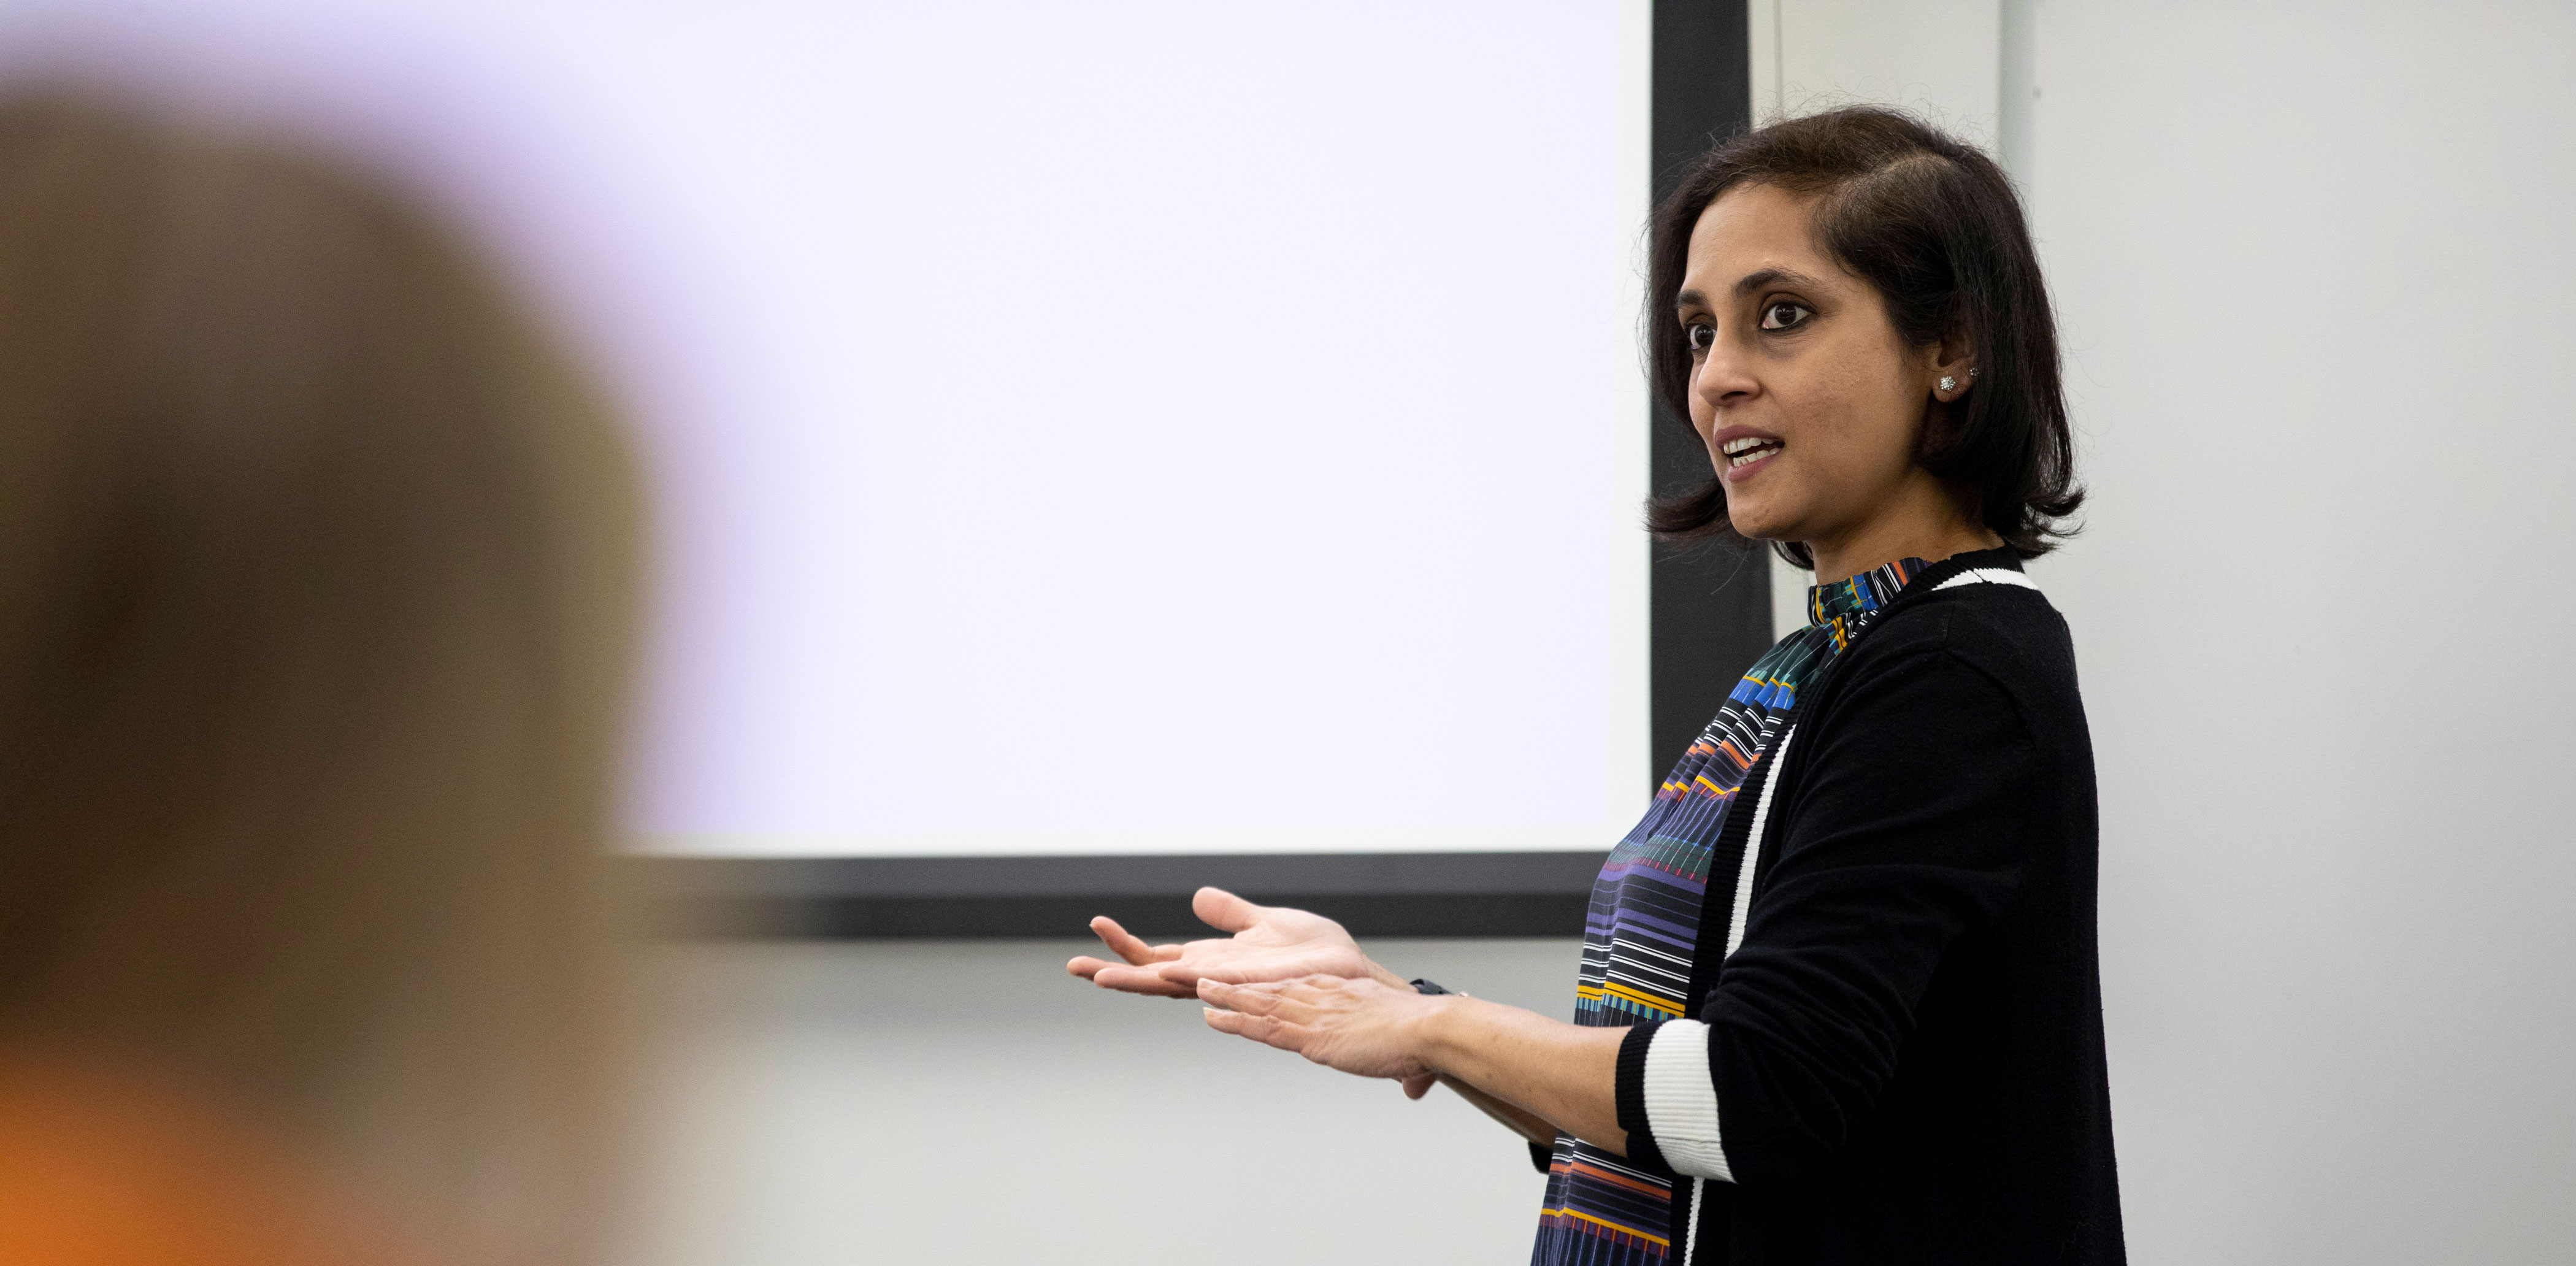 A faculty member gestures while speaking in front of a classroom full of students.